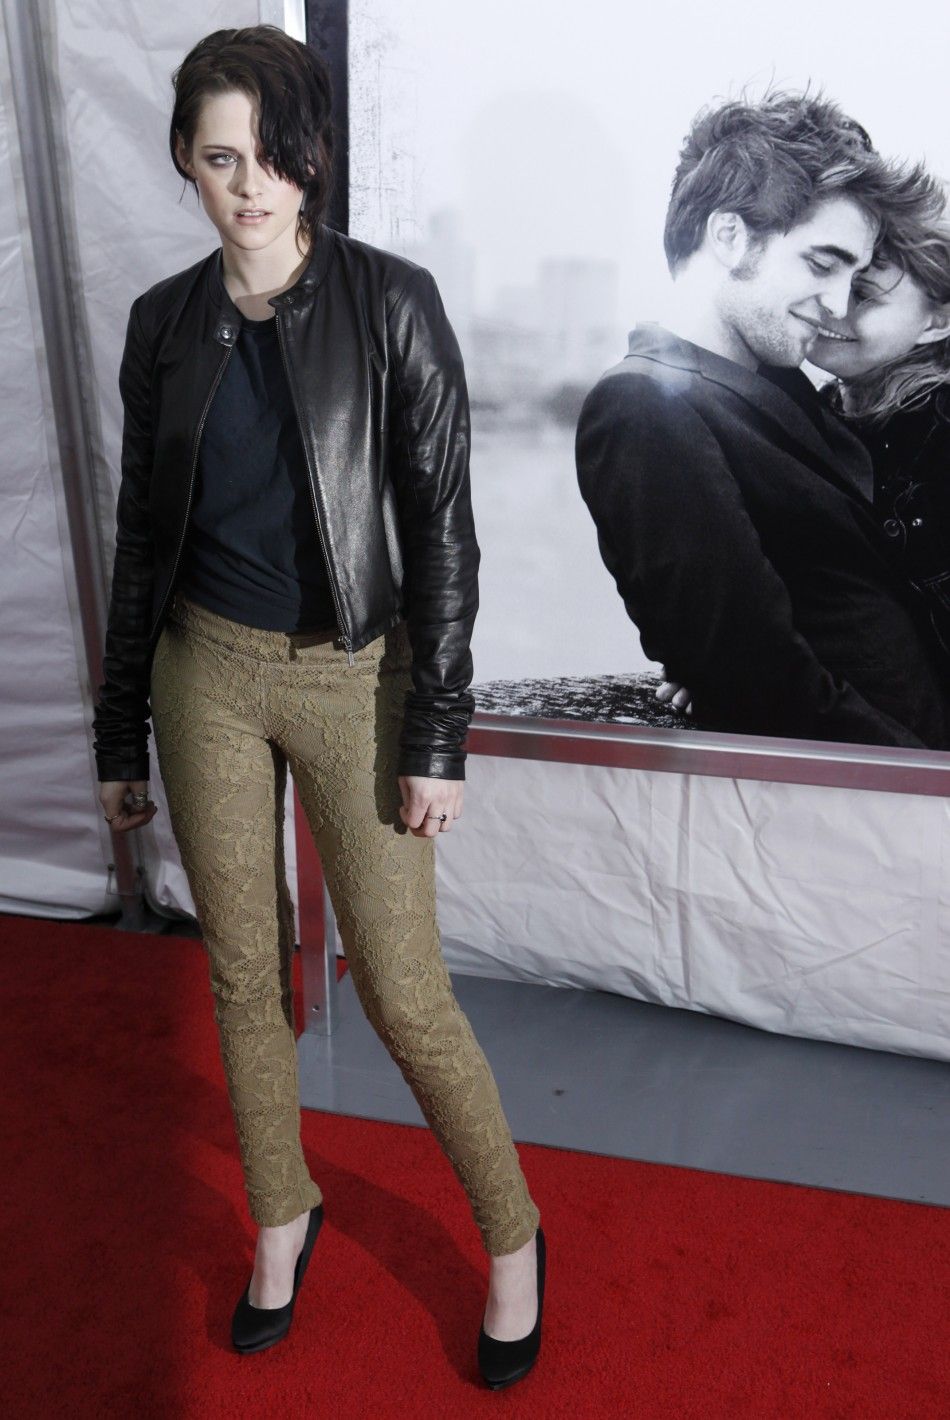 Actress Stewart poses for photographers as she arrives at the premiere of quotRemember Mequot in New York City